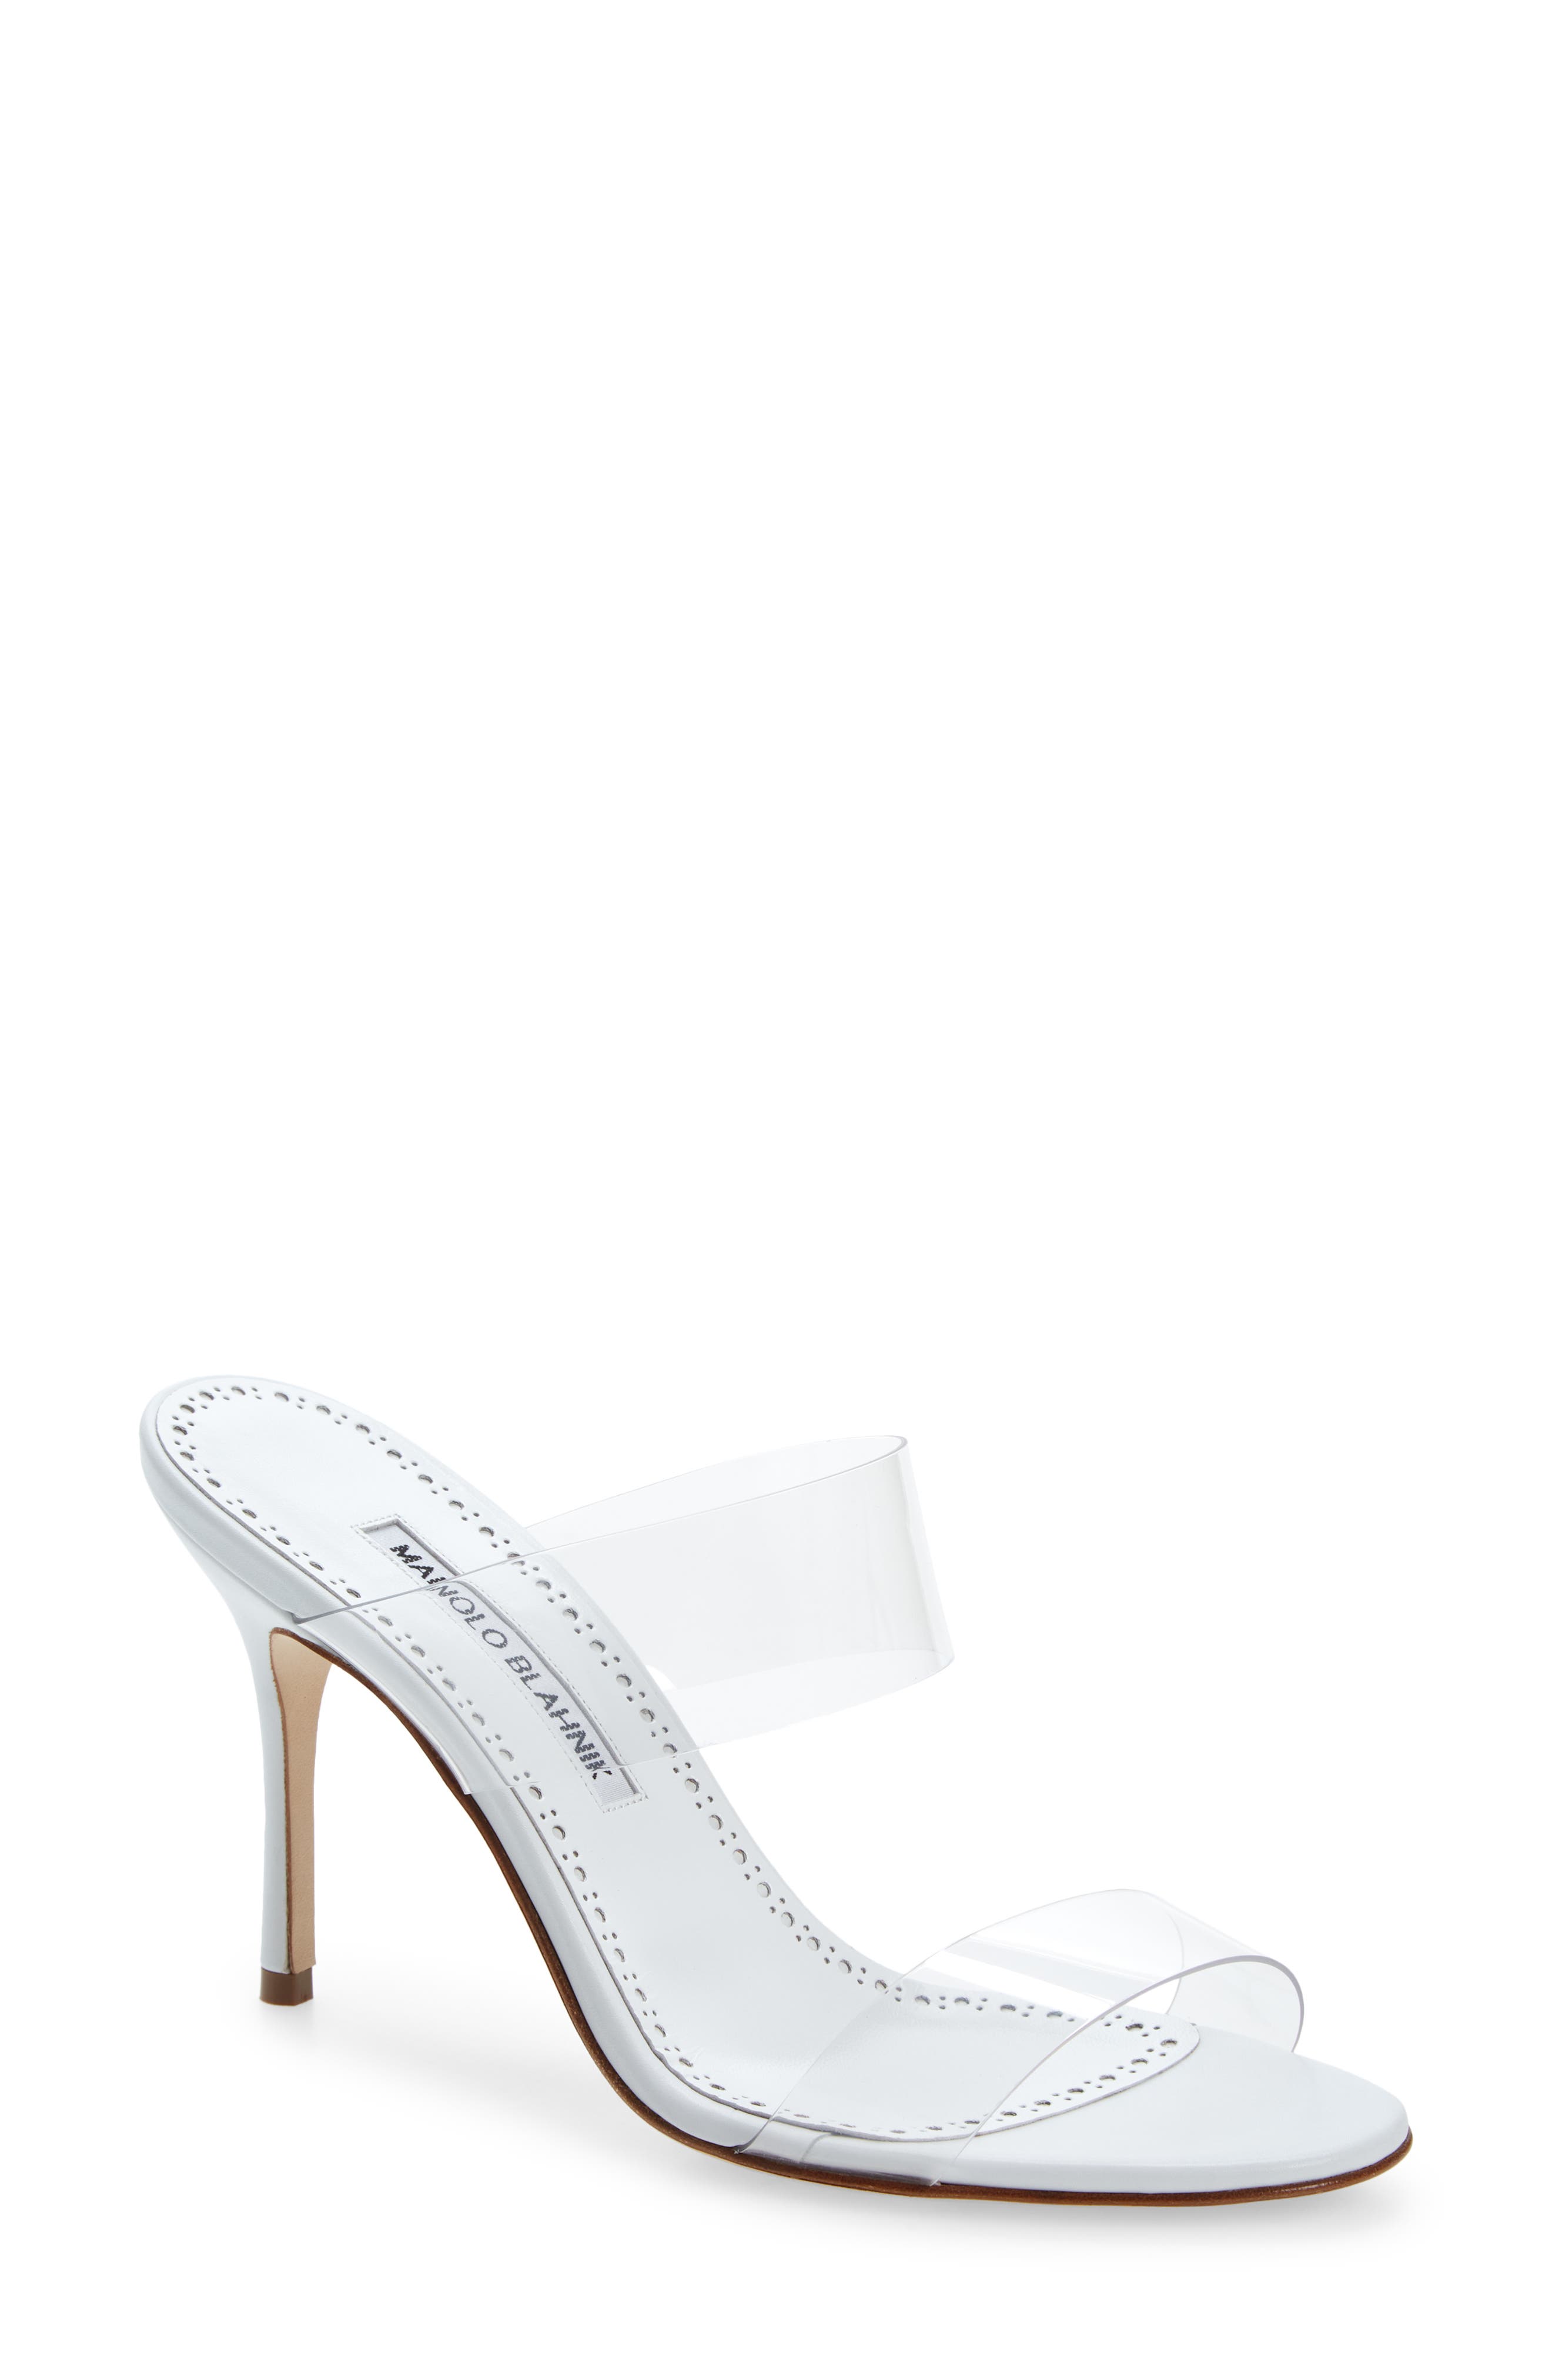 Manolo Blahnik Scolto Clear Double Strap Sandal in White at Nordstrom, Size 7Us